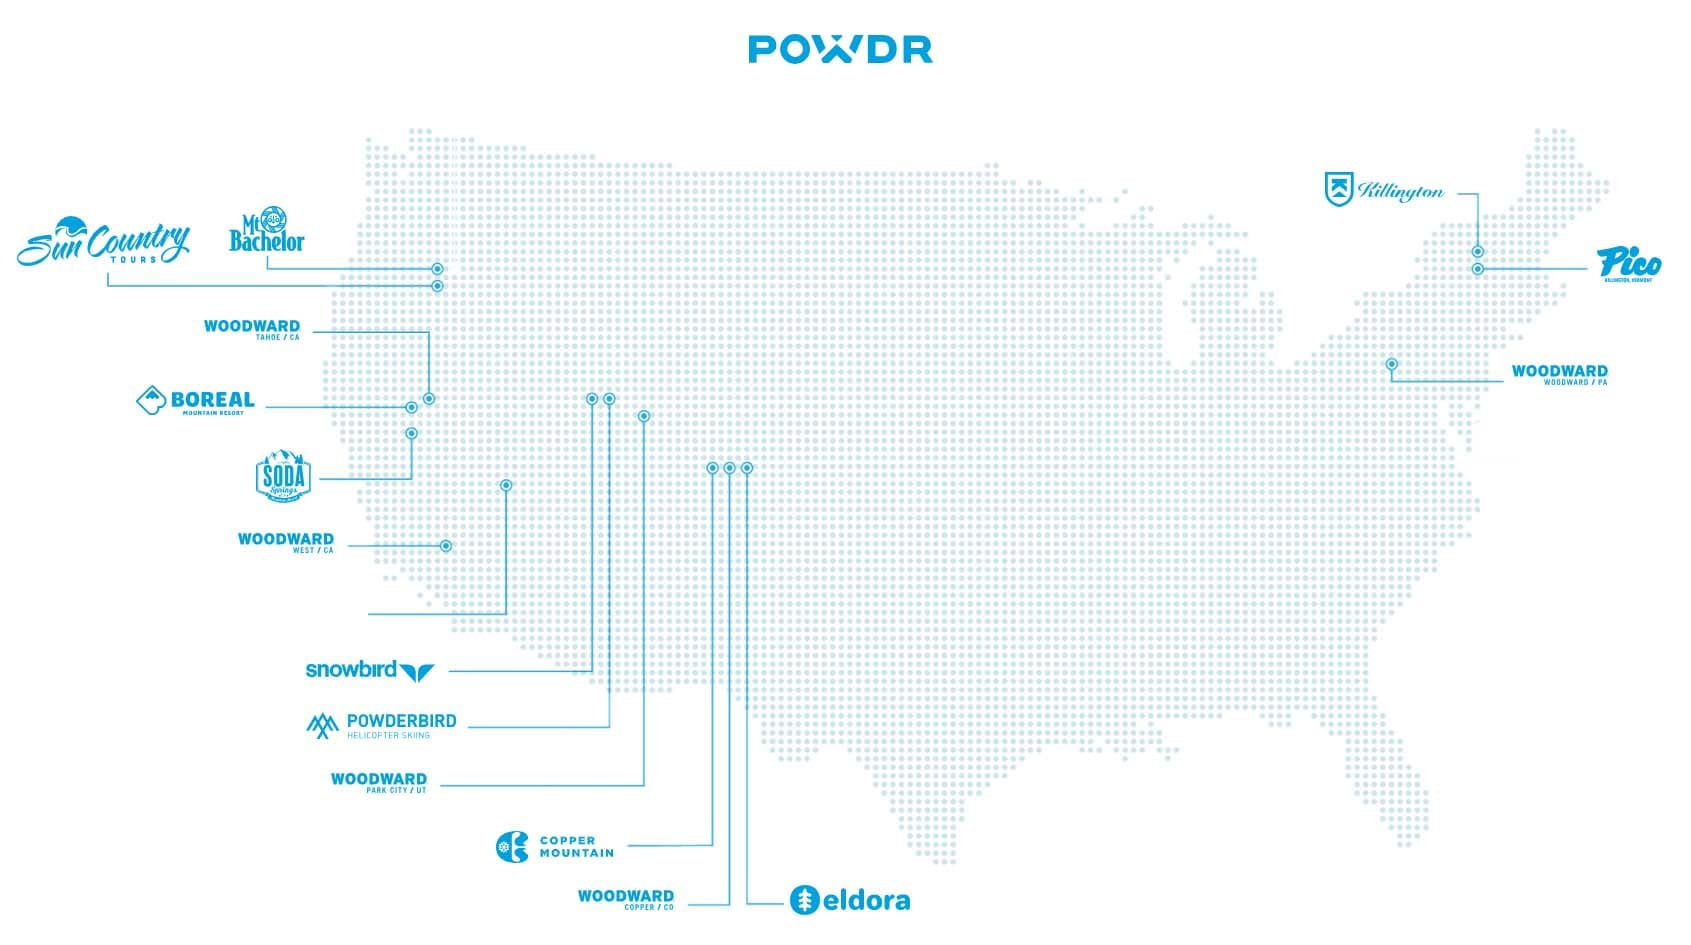 POWDR's ski properties across the United States.  Not shown are SilverStar in British Columbia, and a Woodward facility being built in Australia.